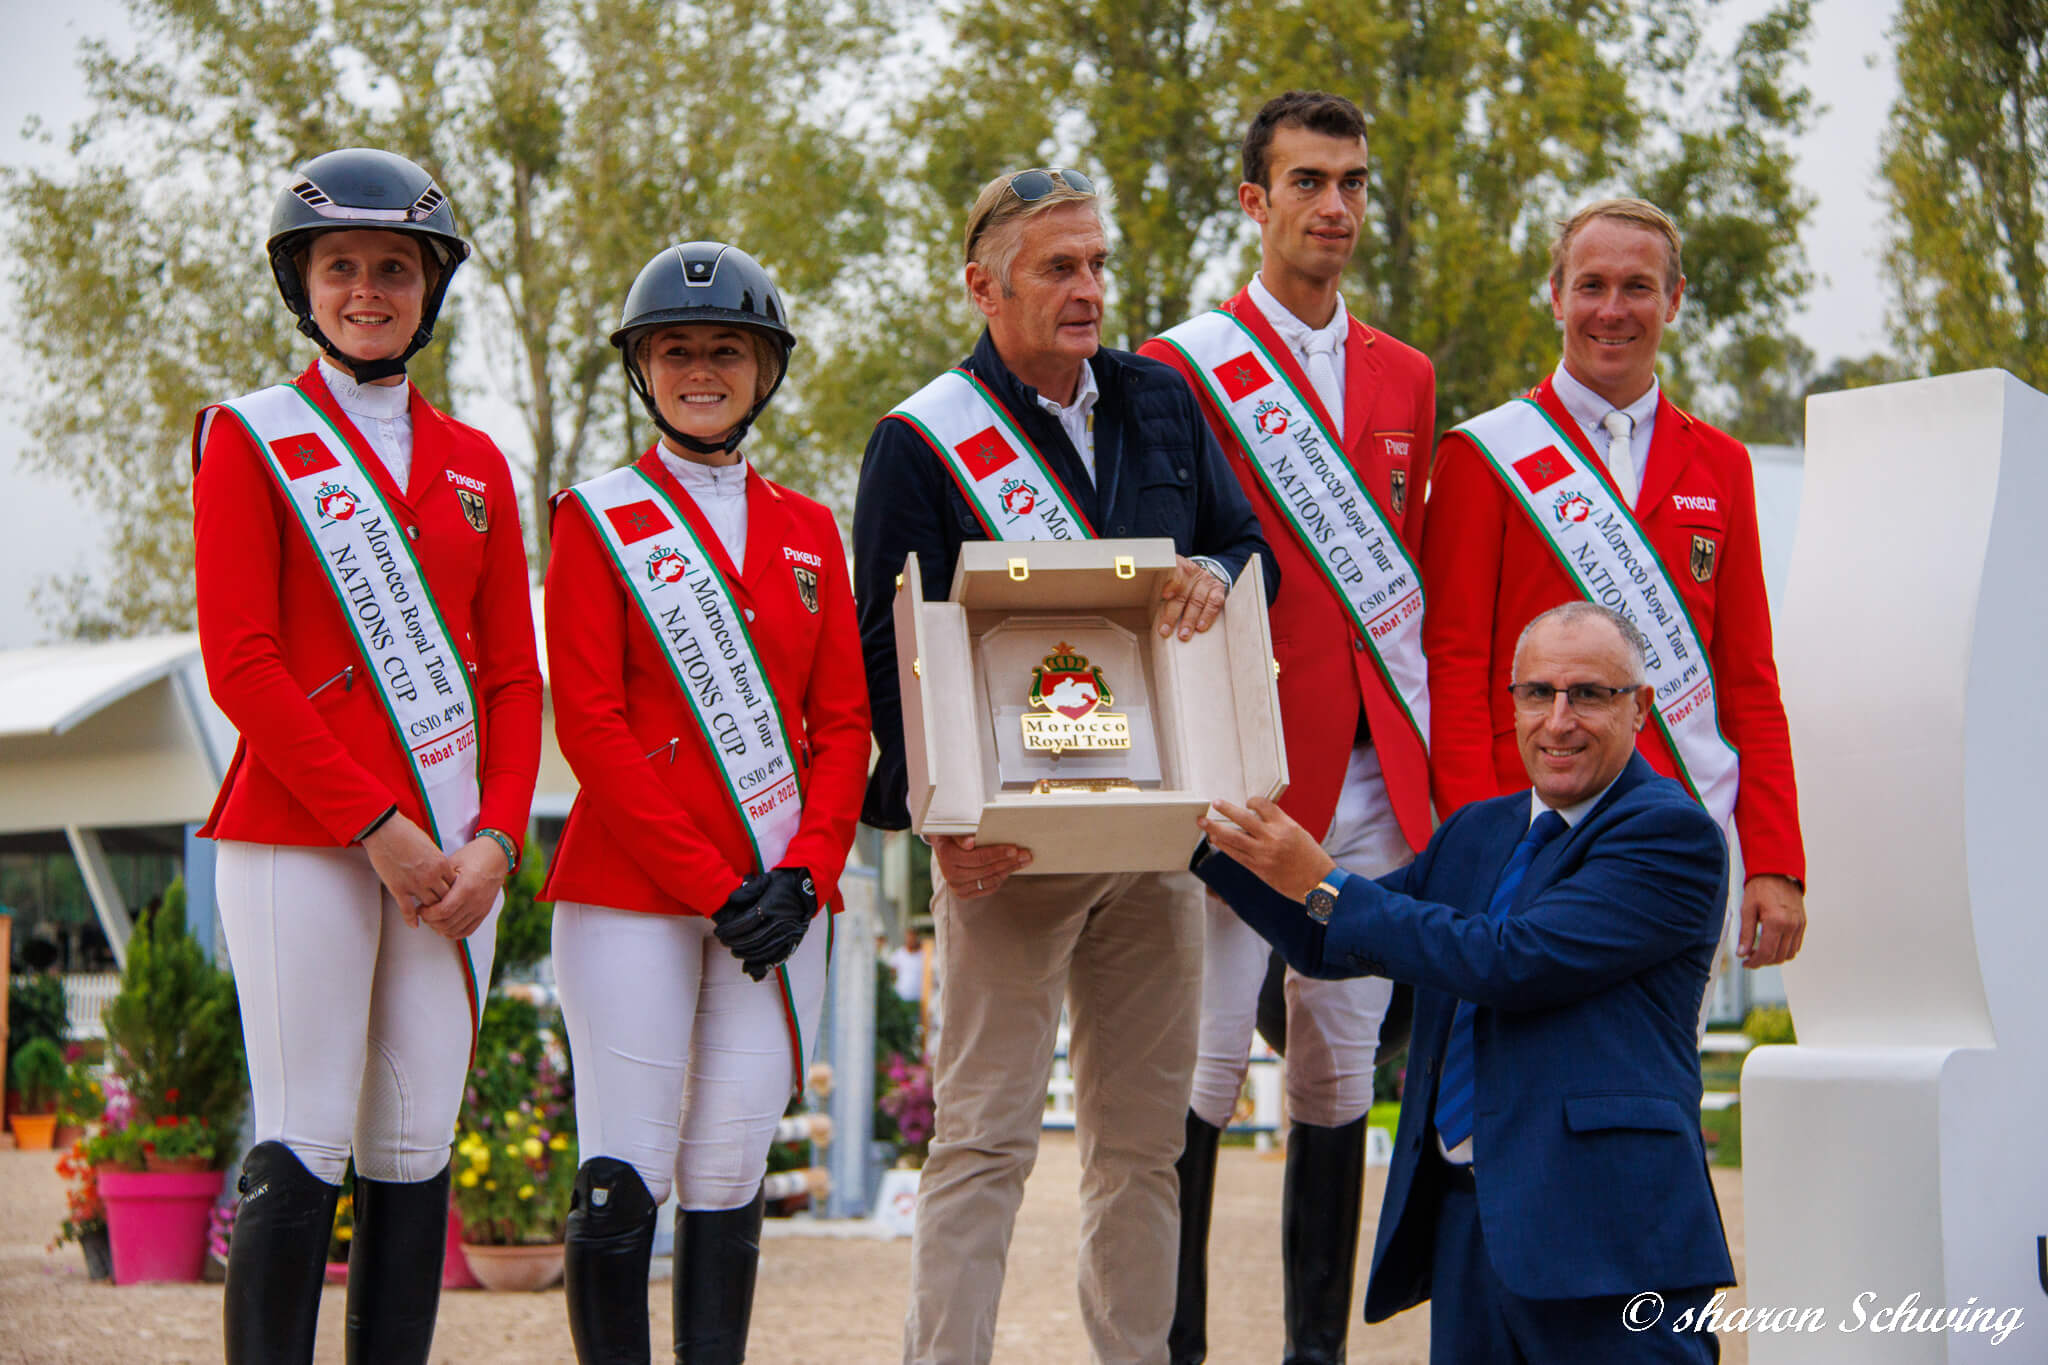 Team Germany wins Nations Cup Morocco Royal Tour